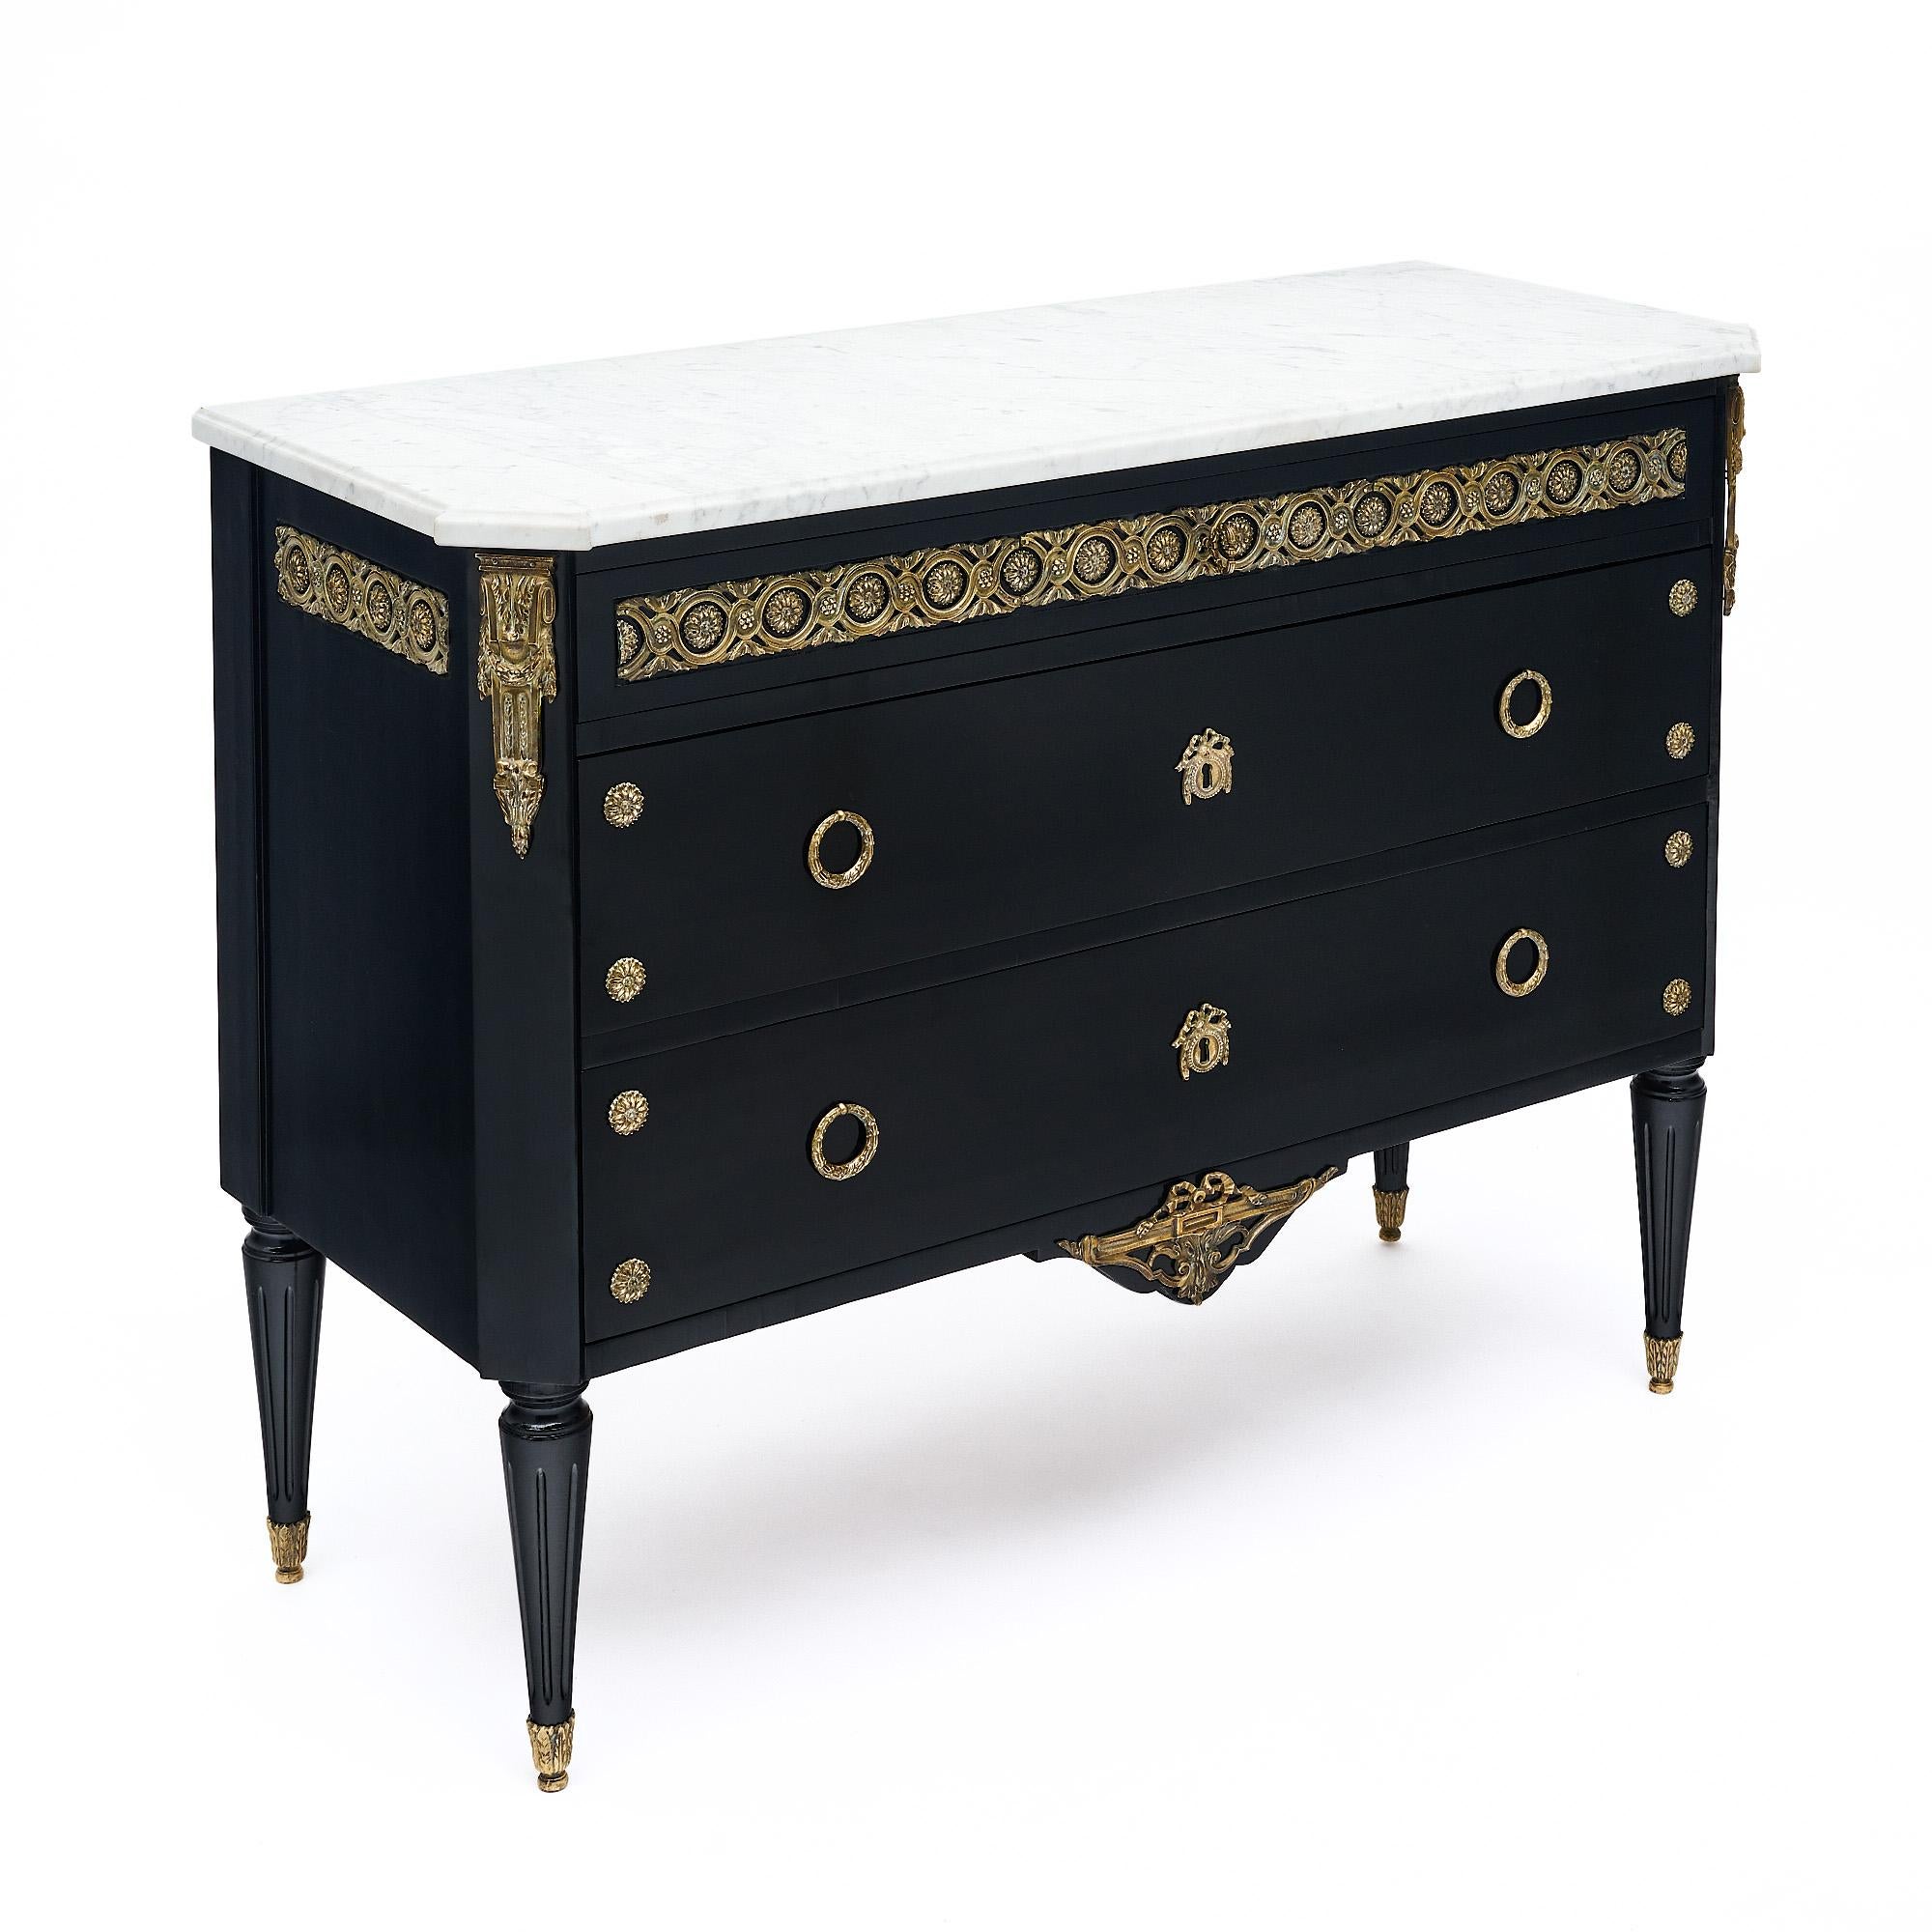 Chest of drawers in the Louis XVI style from France. This piece has been ebonized and finished with a lustrous museum-quality French polish with gilded ormulu throughout. Three dovetailed drawers are all adorned with gilt brass décor and the chest